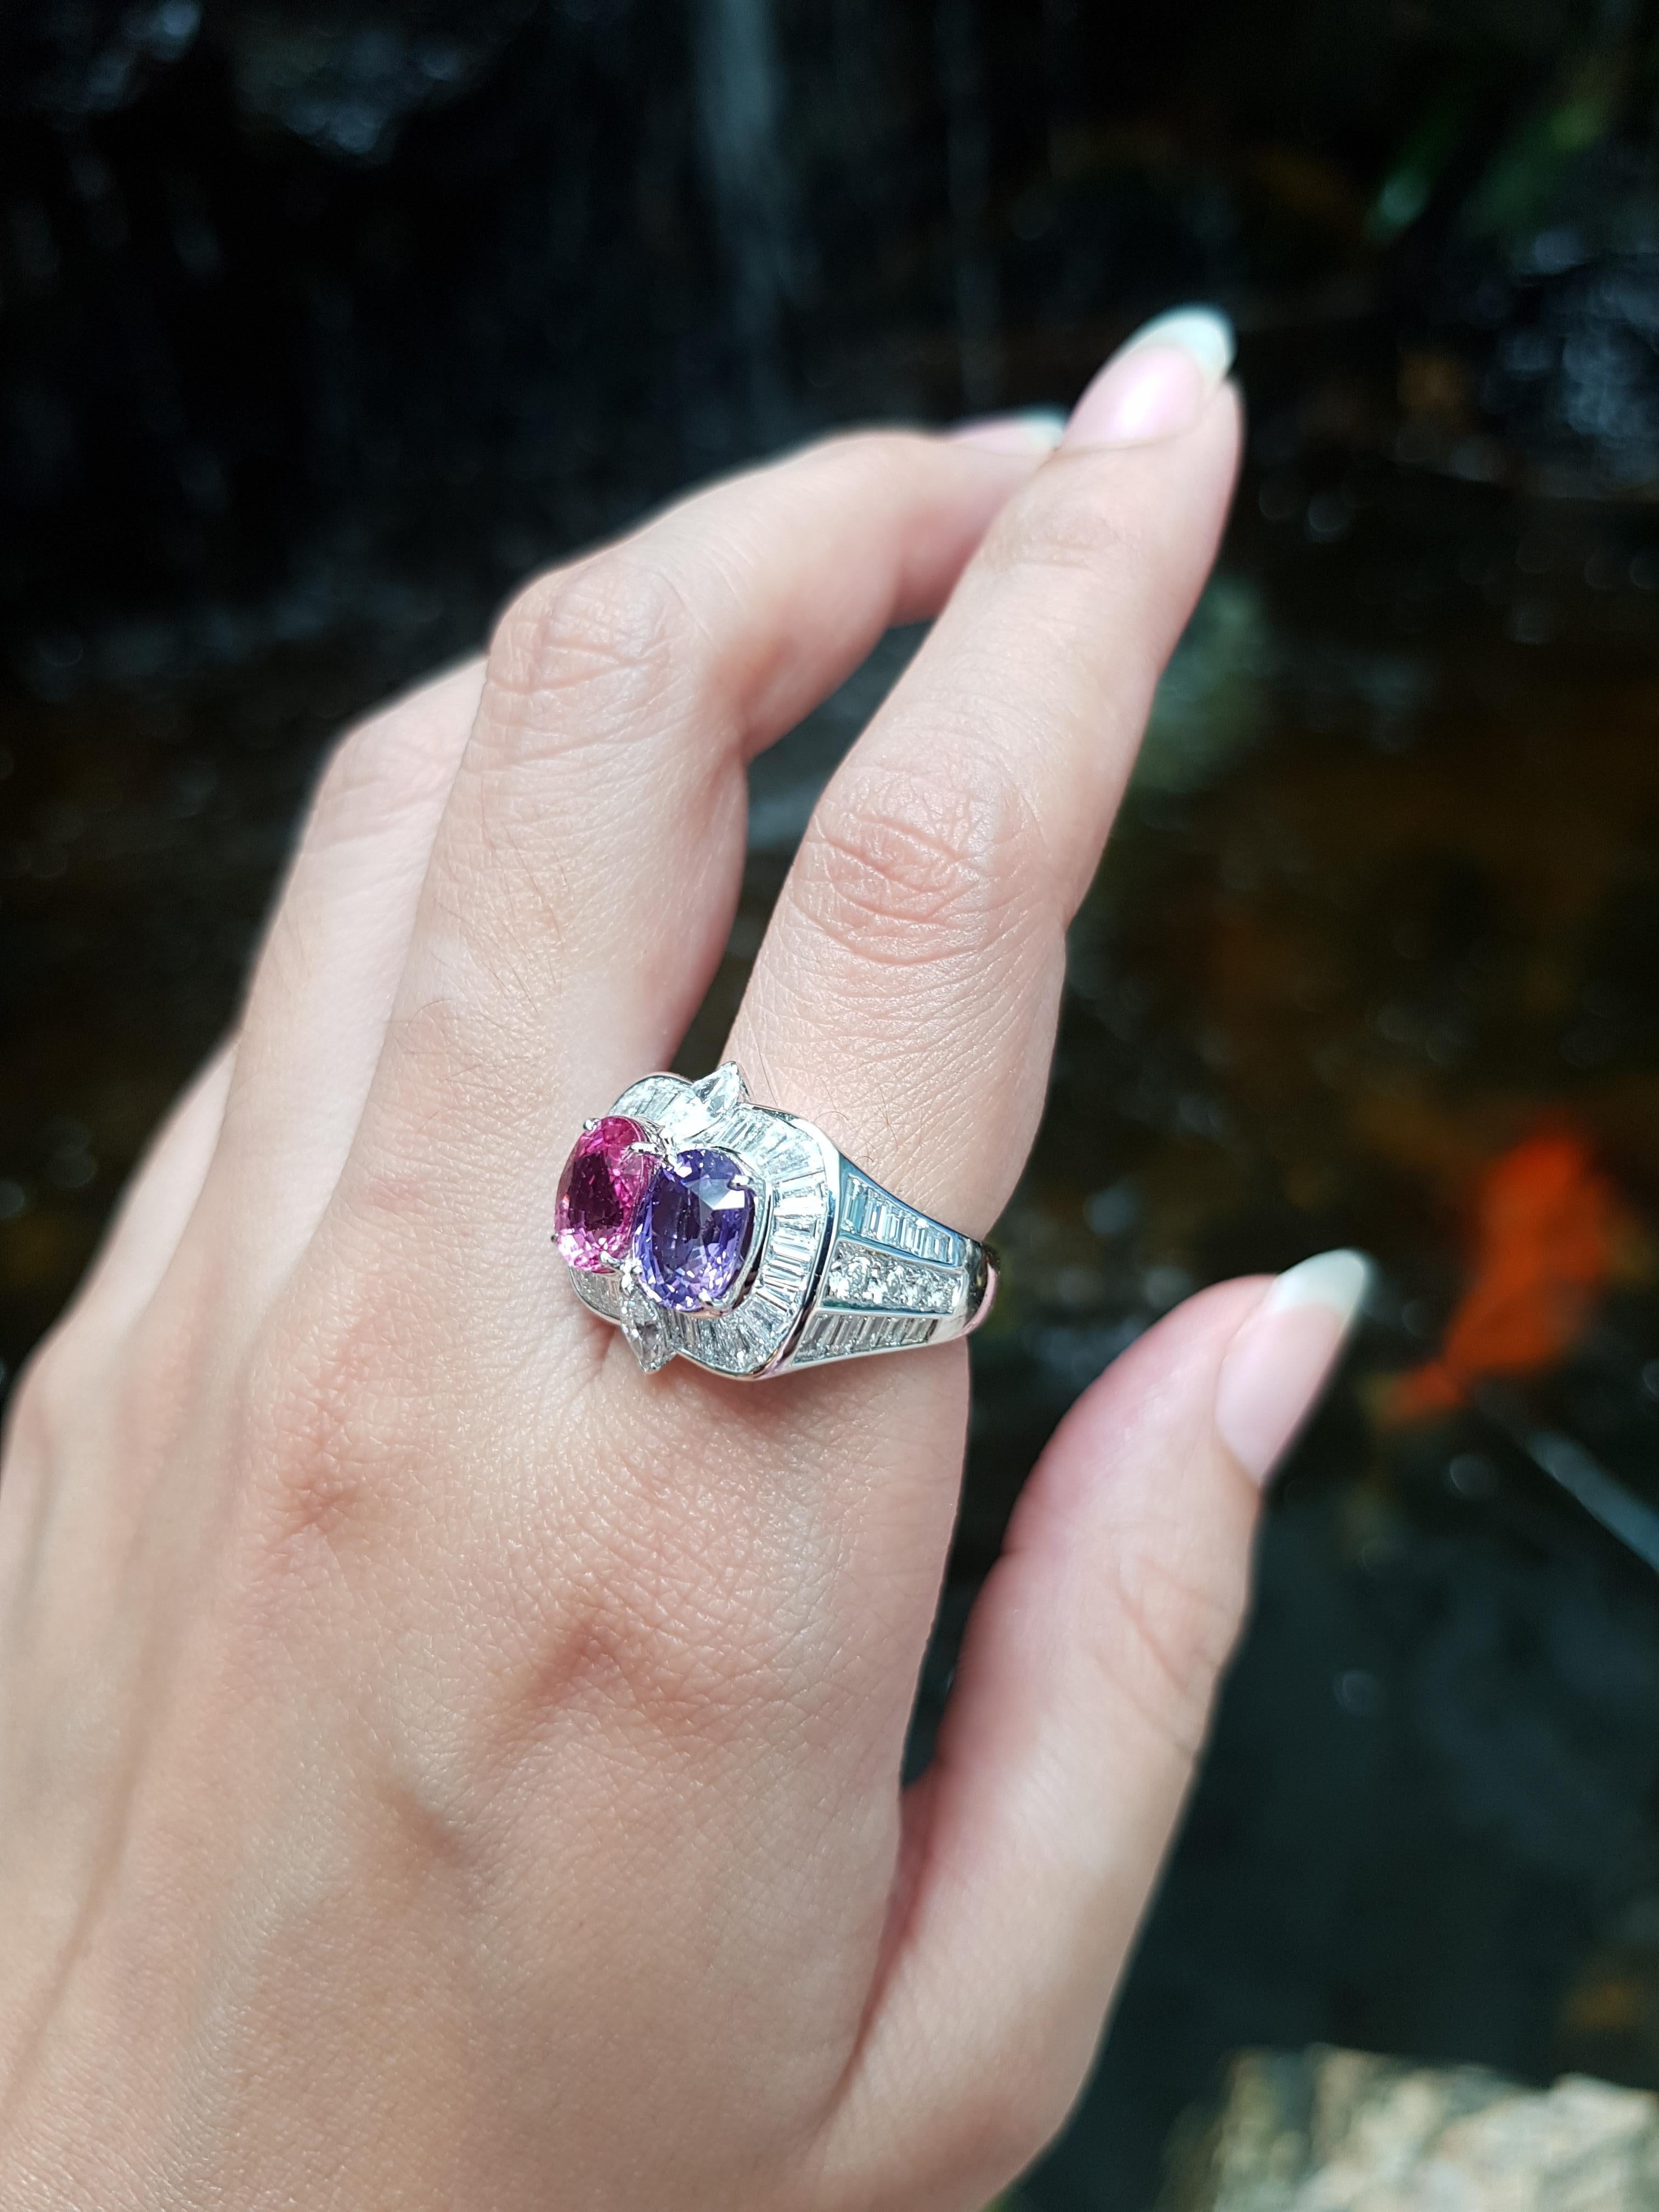 Purple Sapphire 2.38 carats, Pink Sapphire 2.20 carats and Diamond 2.76 carats Ring set in 18 Karat White Gold Settings

Width:  1.8 cm 
Length:  1.7 cm
Ring Size: 51
Total Weight: 14.0 grams

